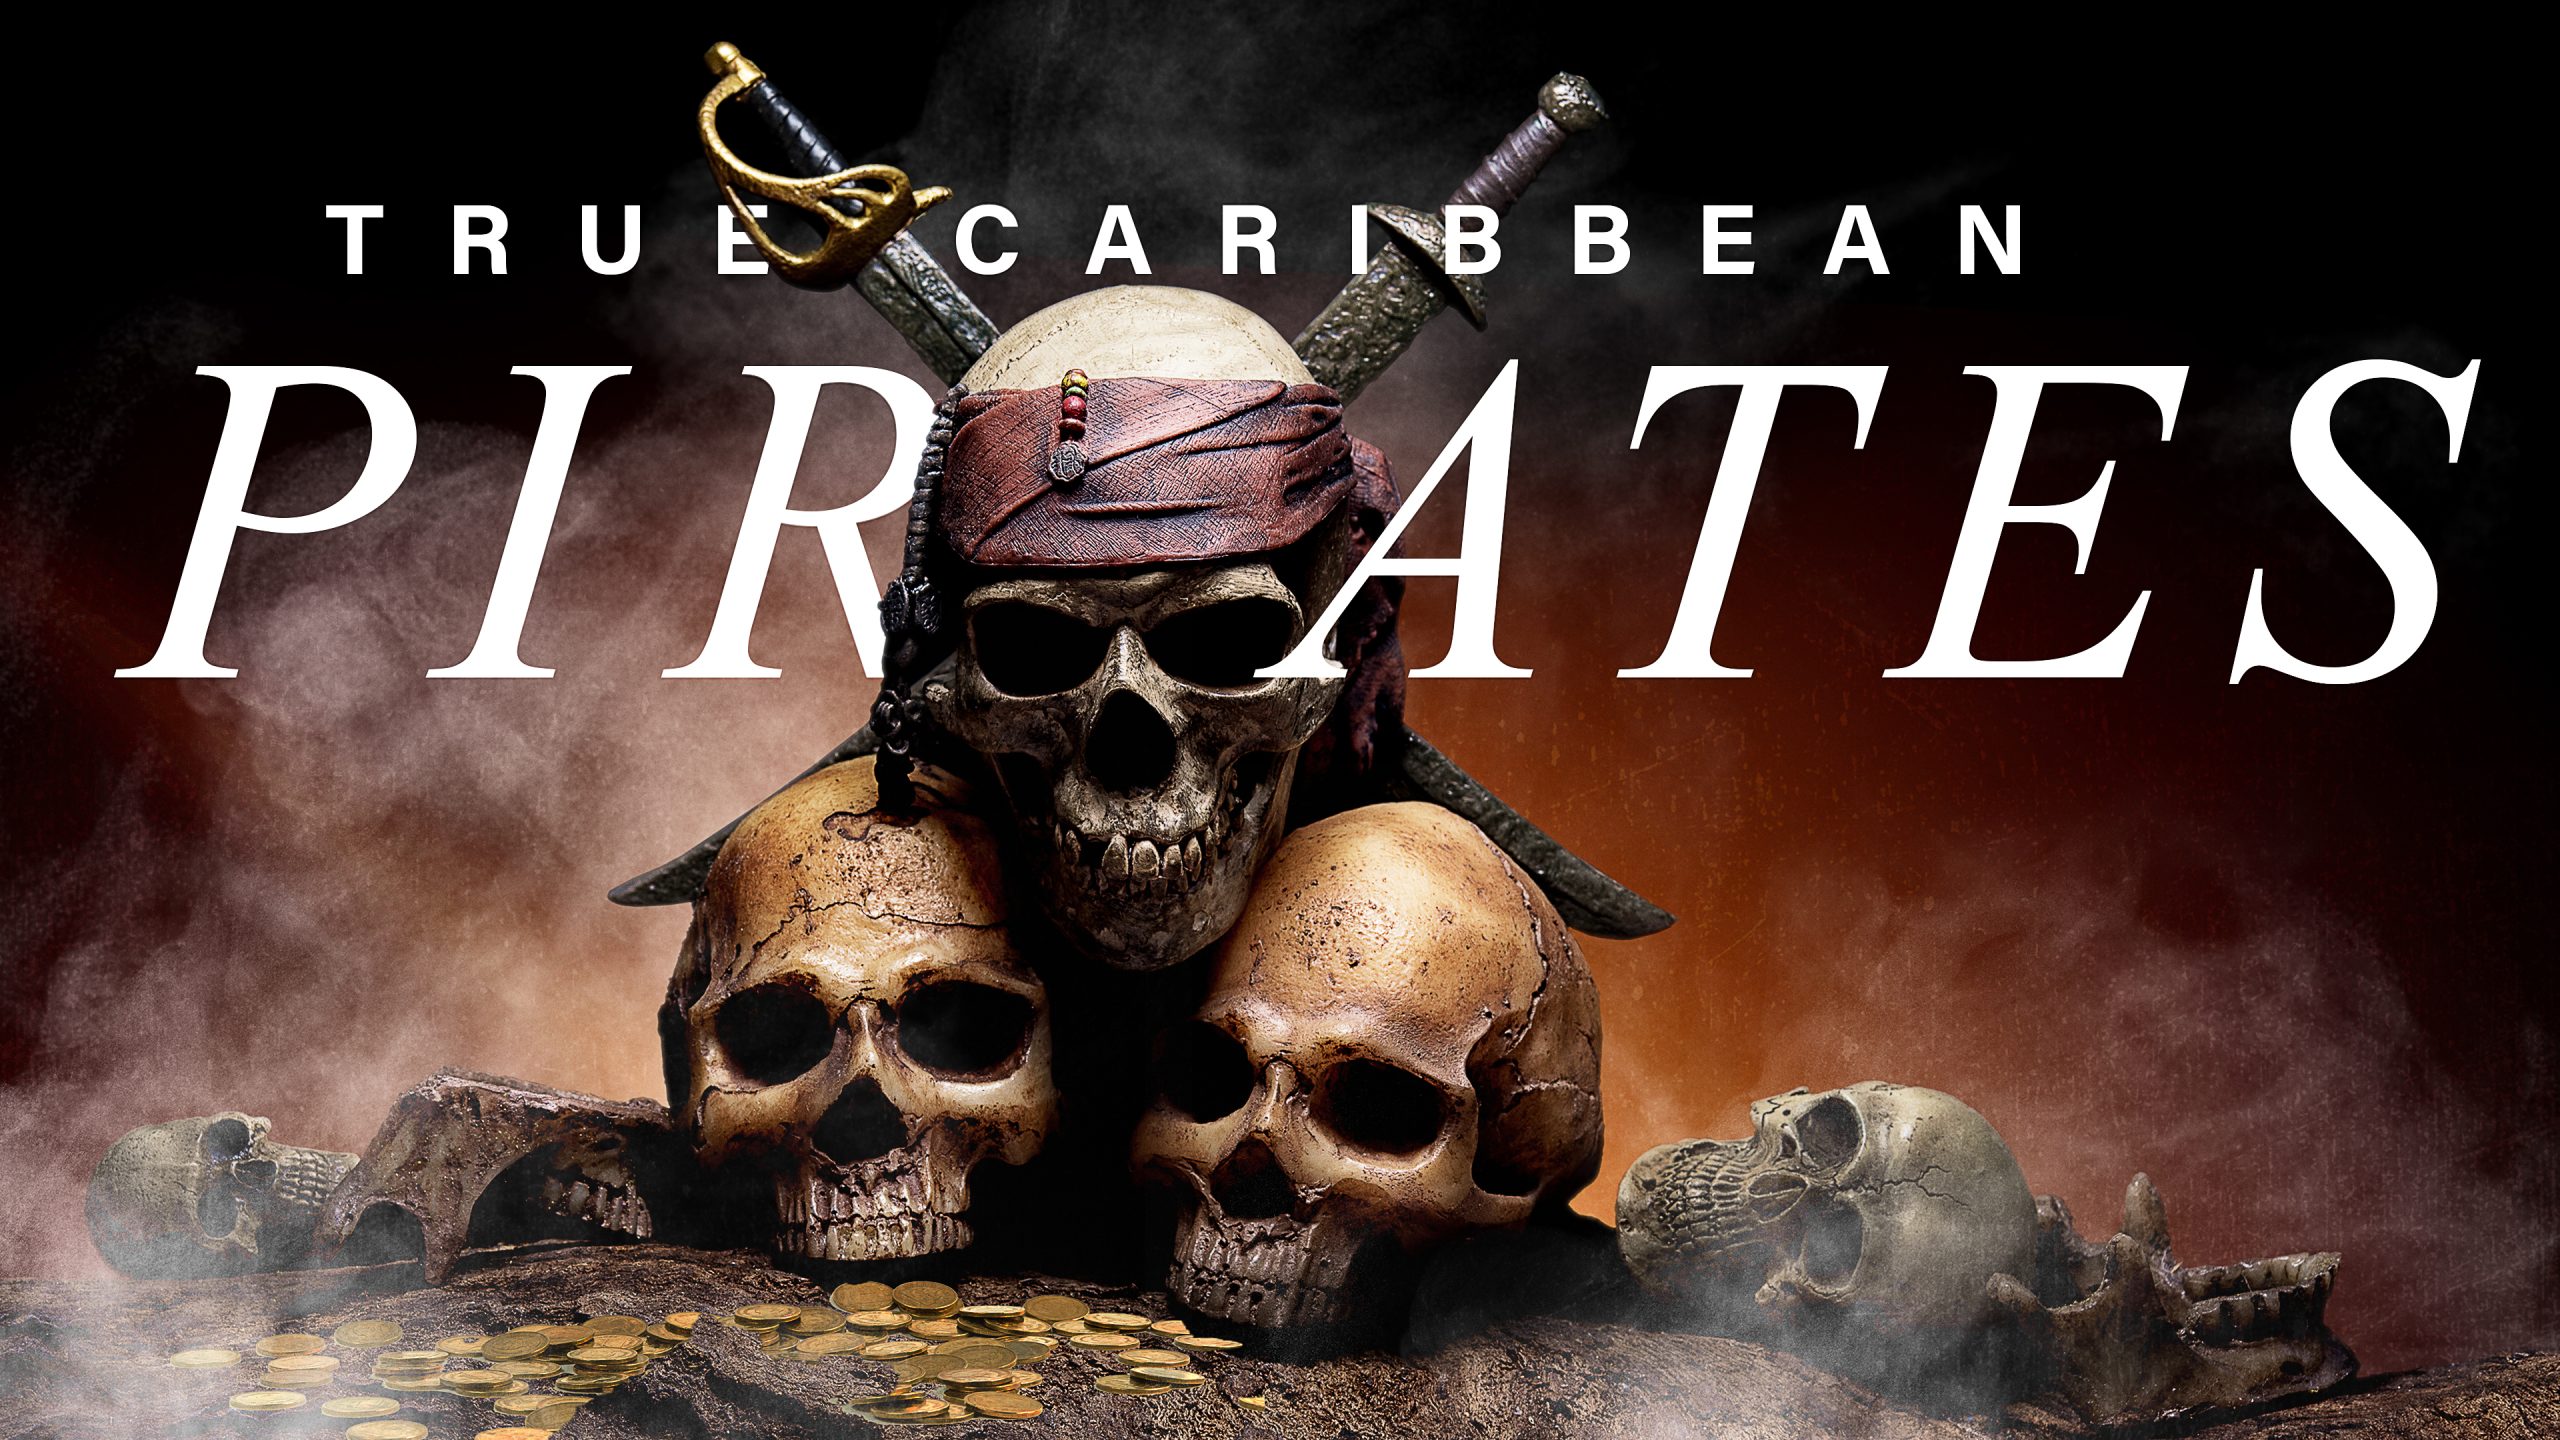 watch pirates of the caribbean 2 online free tamil dubbed